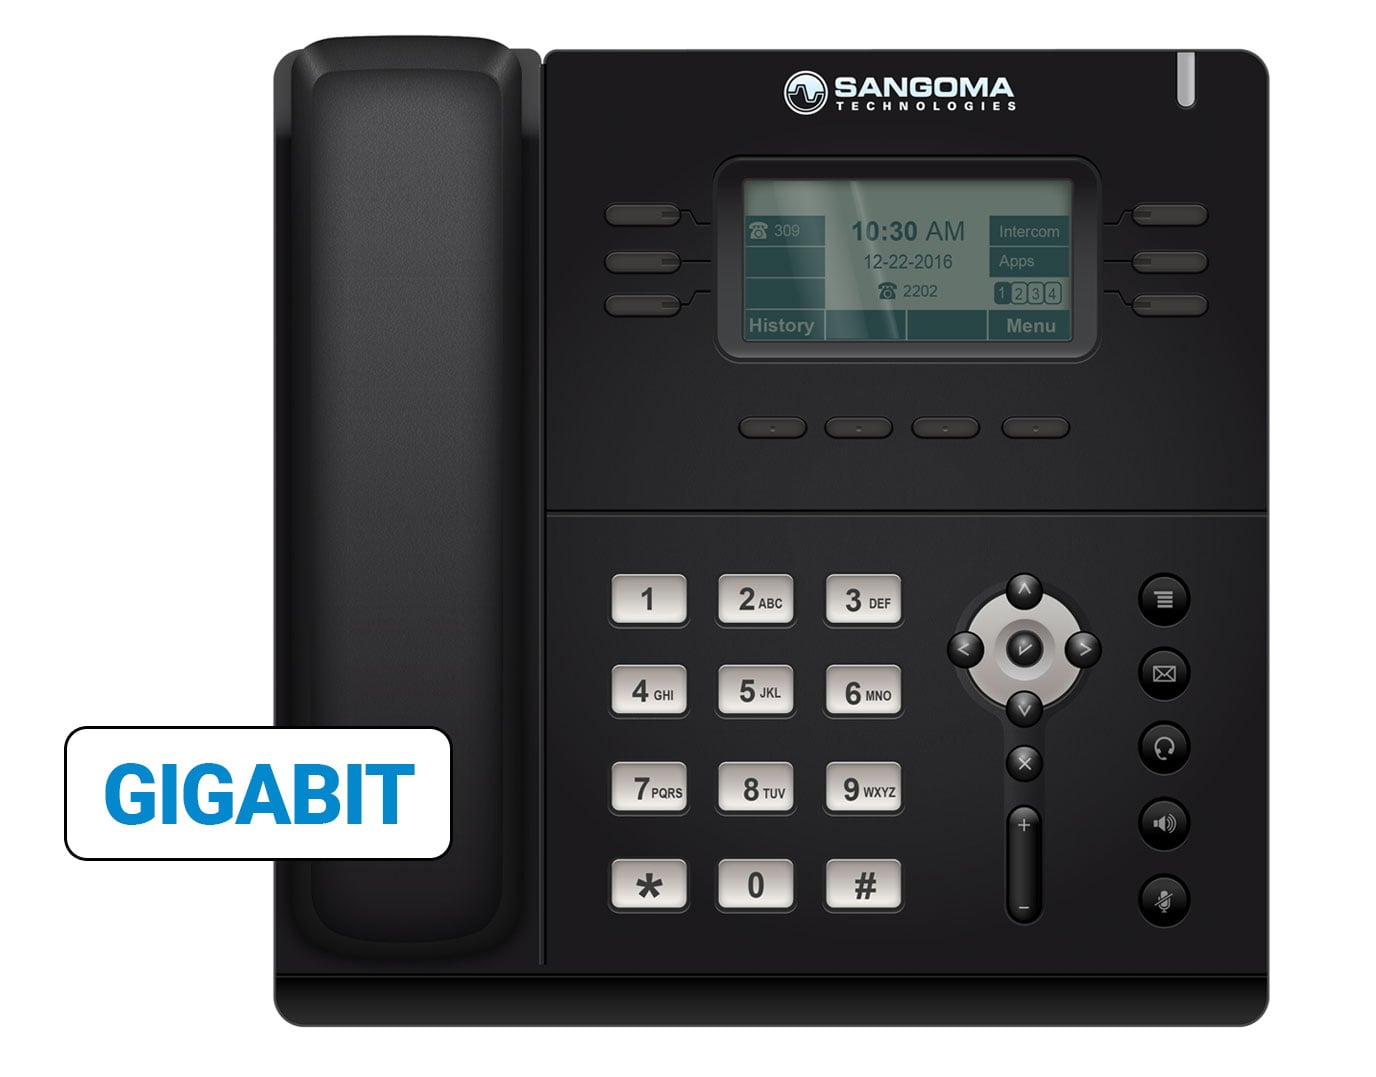 Sangoma S405 Phone for the NEC SL1100 and DSX My Tech Distributors